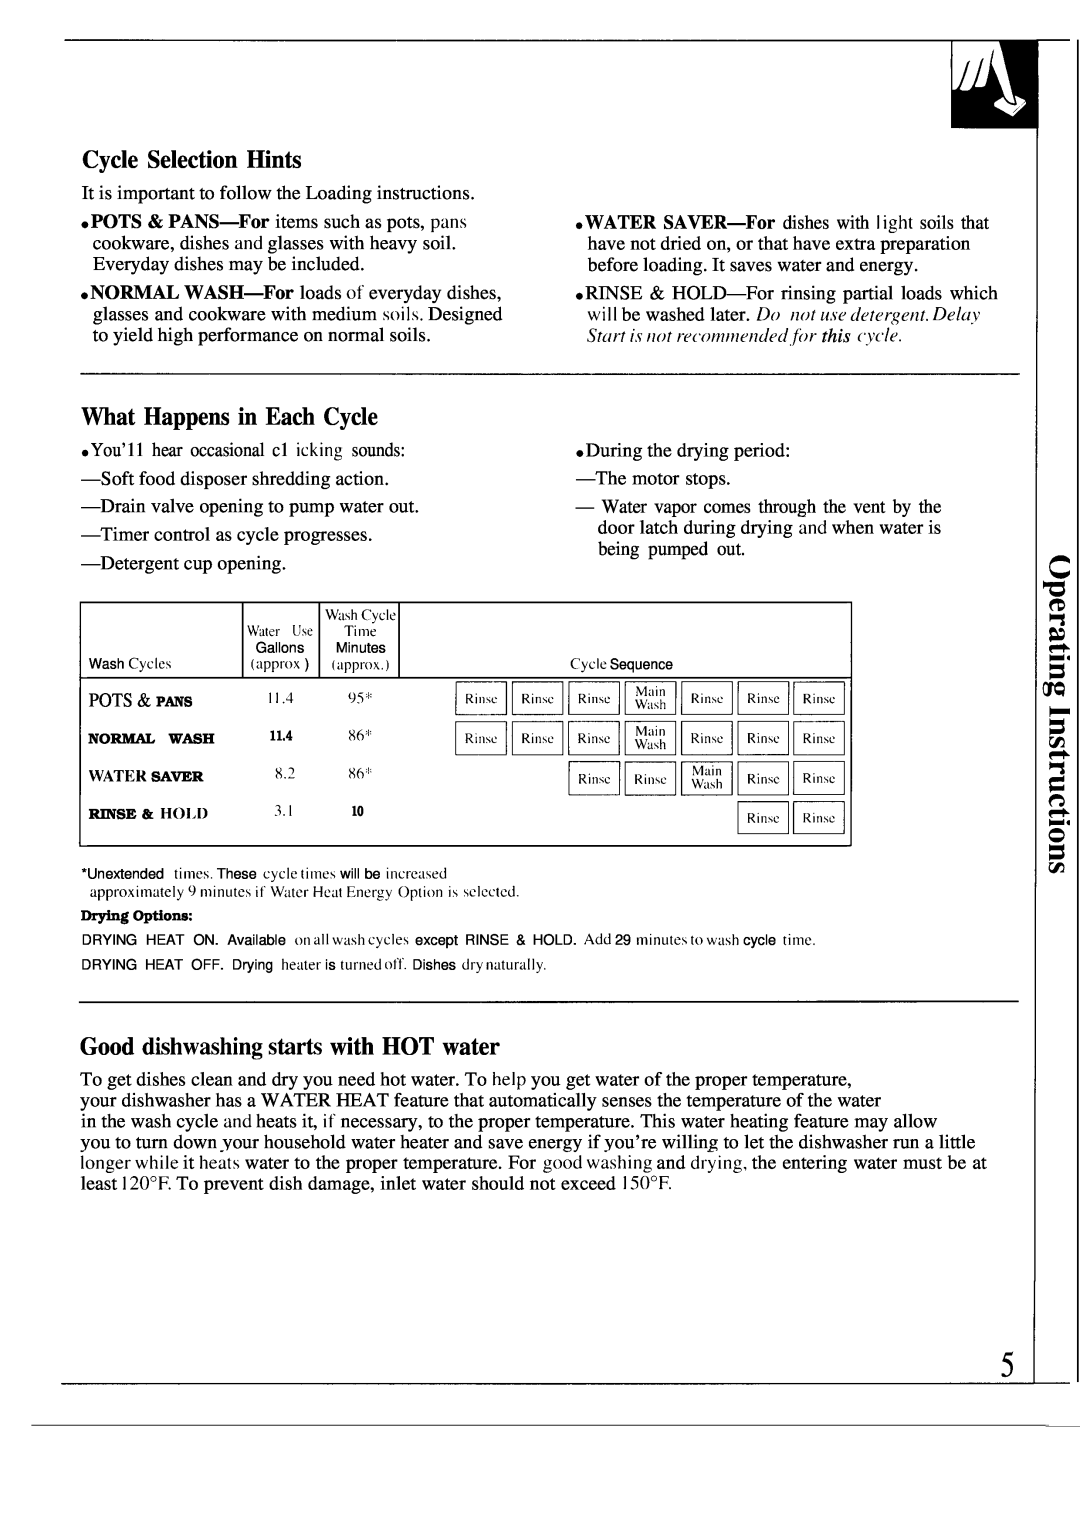 Hotpoint HDA750 warranty Cycle Selection Hints, What Happens in Each Cycle, mmmmm, Good dishwashing stark with HOT water 